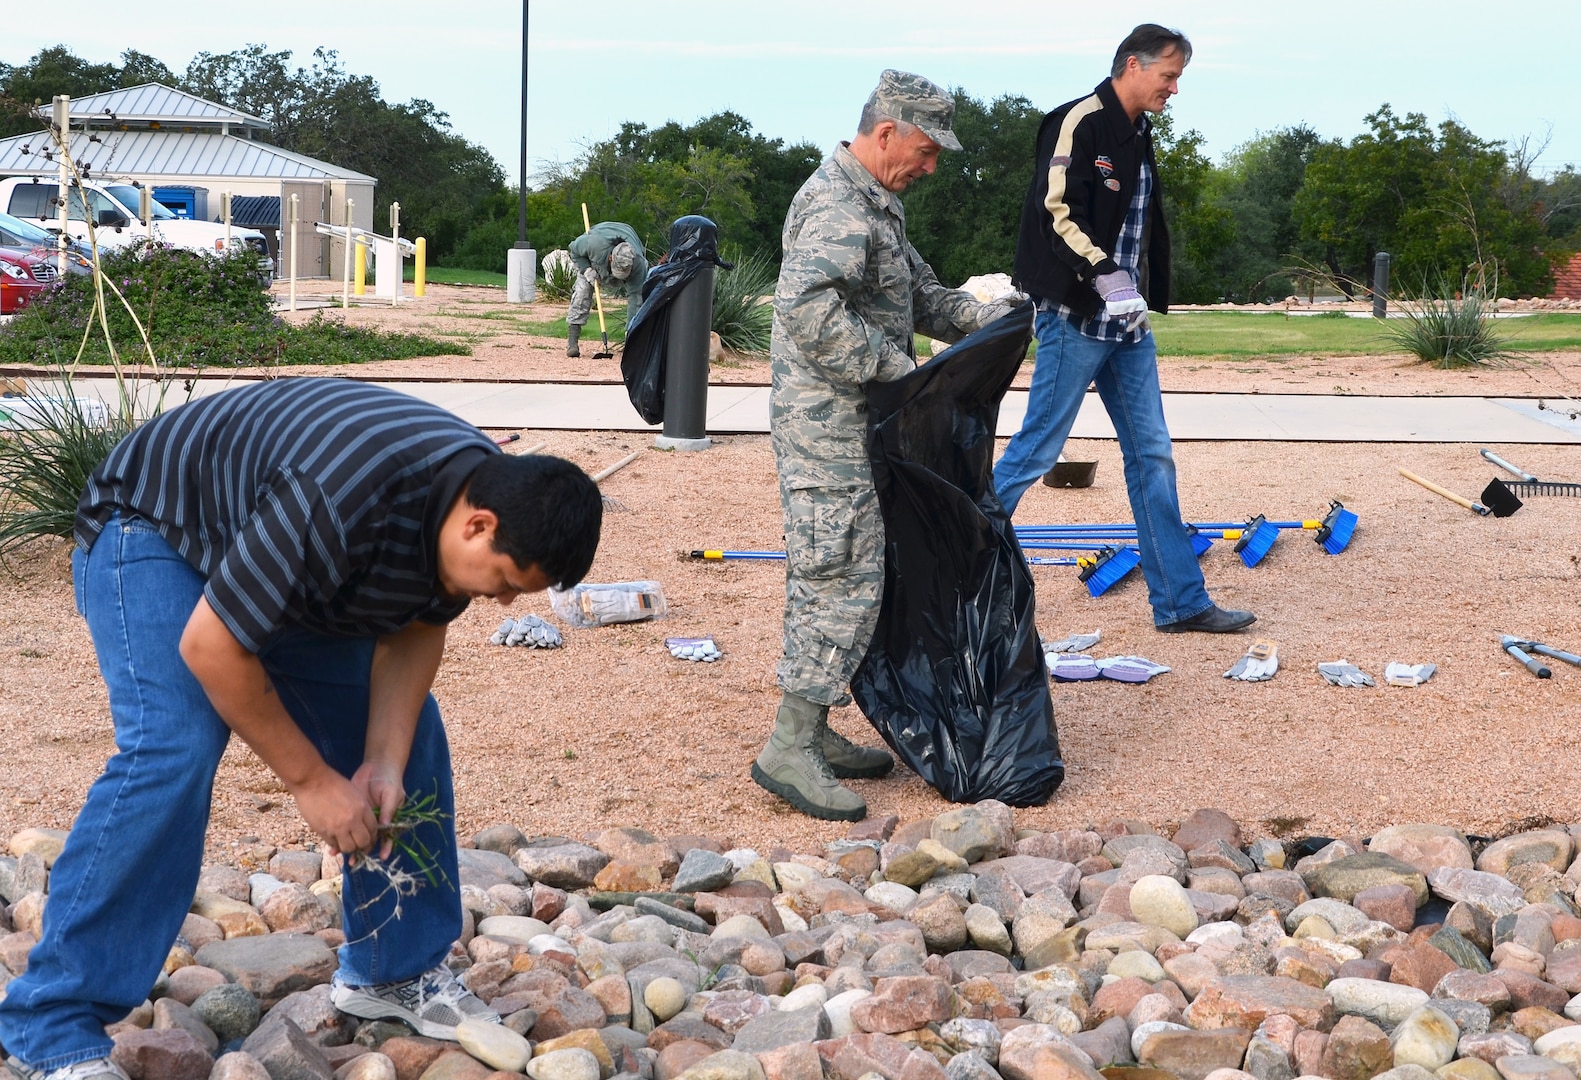 Chris Alvarez, Chaplain (Col.) Steven McCain and Chris Kelly participate in the 502nd Air Base Wing’s first Pride Day Nov. 8 at Joint Base San Antonio-Fort Sam Houston. Members of the 502nd Air Base Wing and the Mission Support Groups throughout JBSA cleaning areas both inside and outside their facilities. (Photo by Lori Newman, JBSA-Fort Sam Houston Public Affairs)